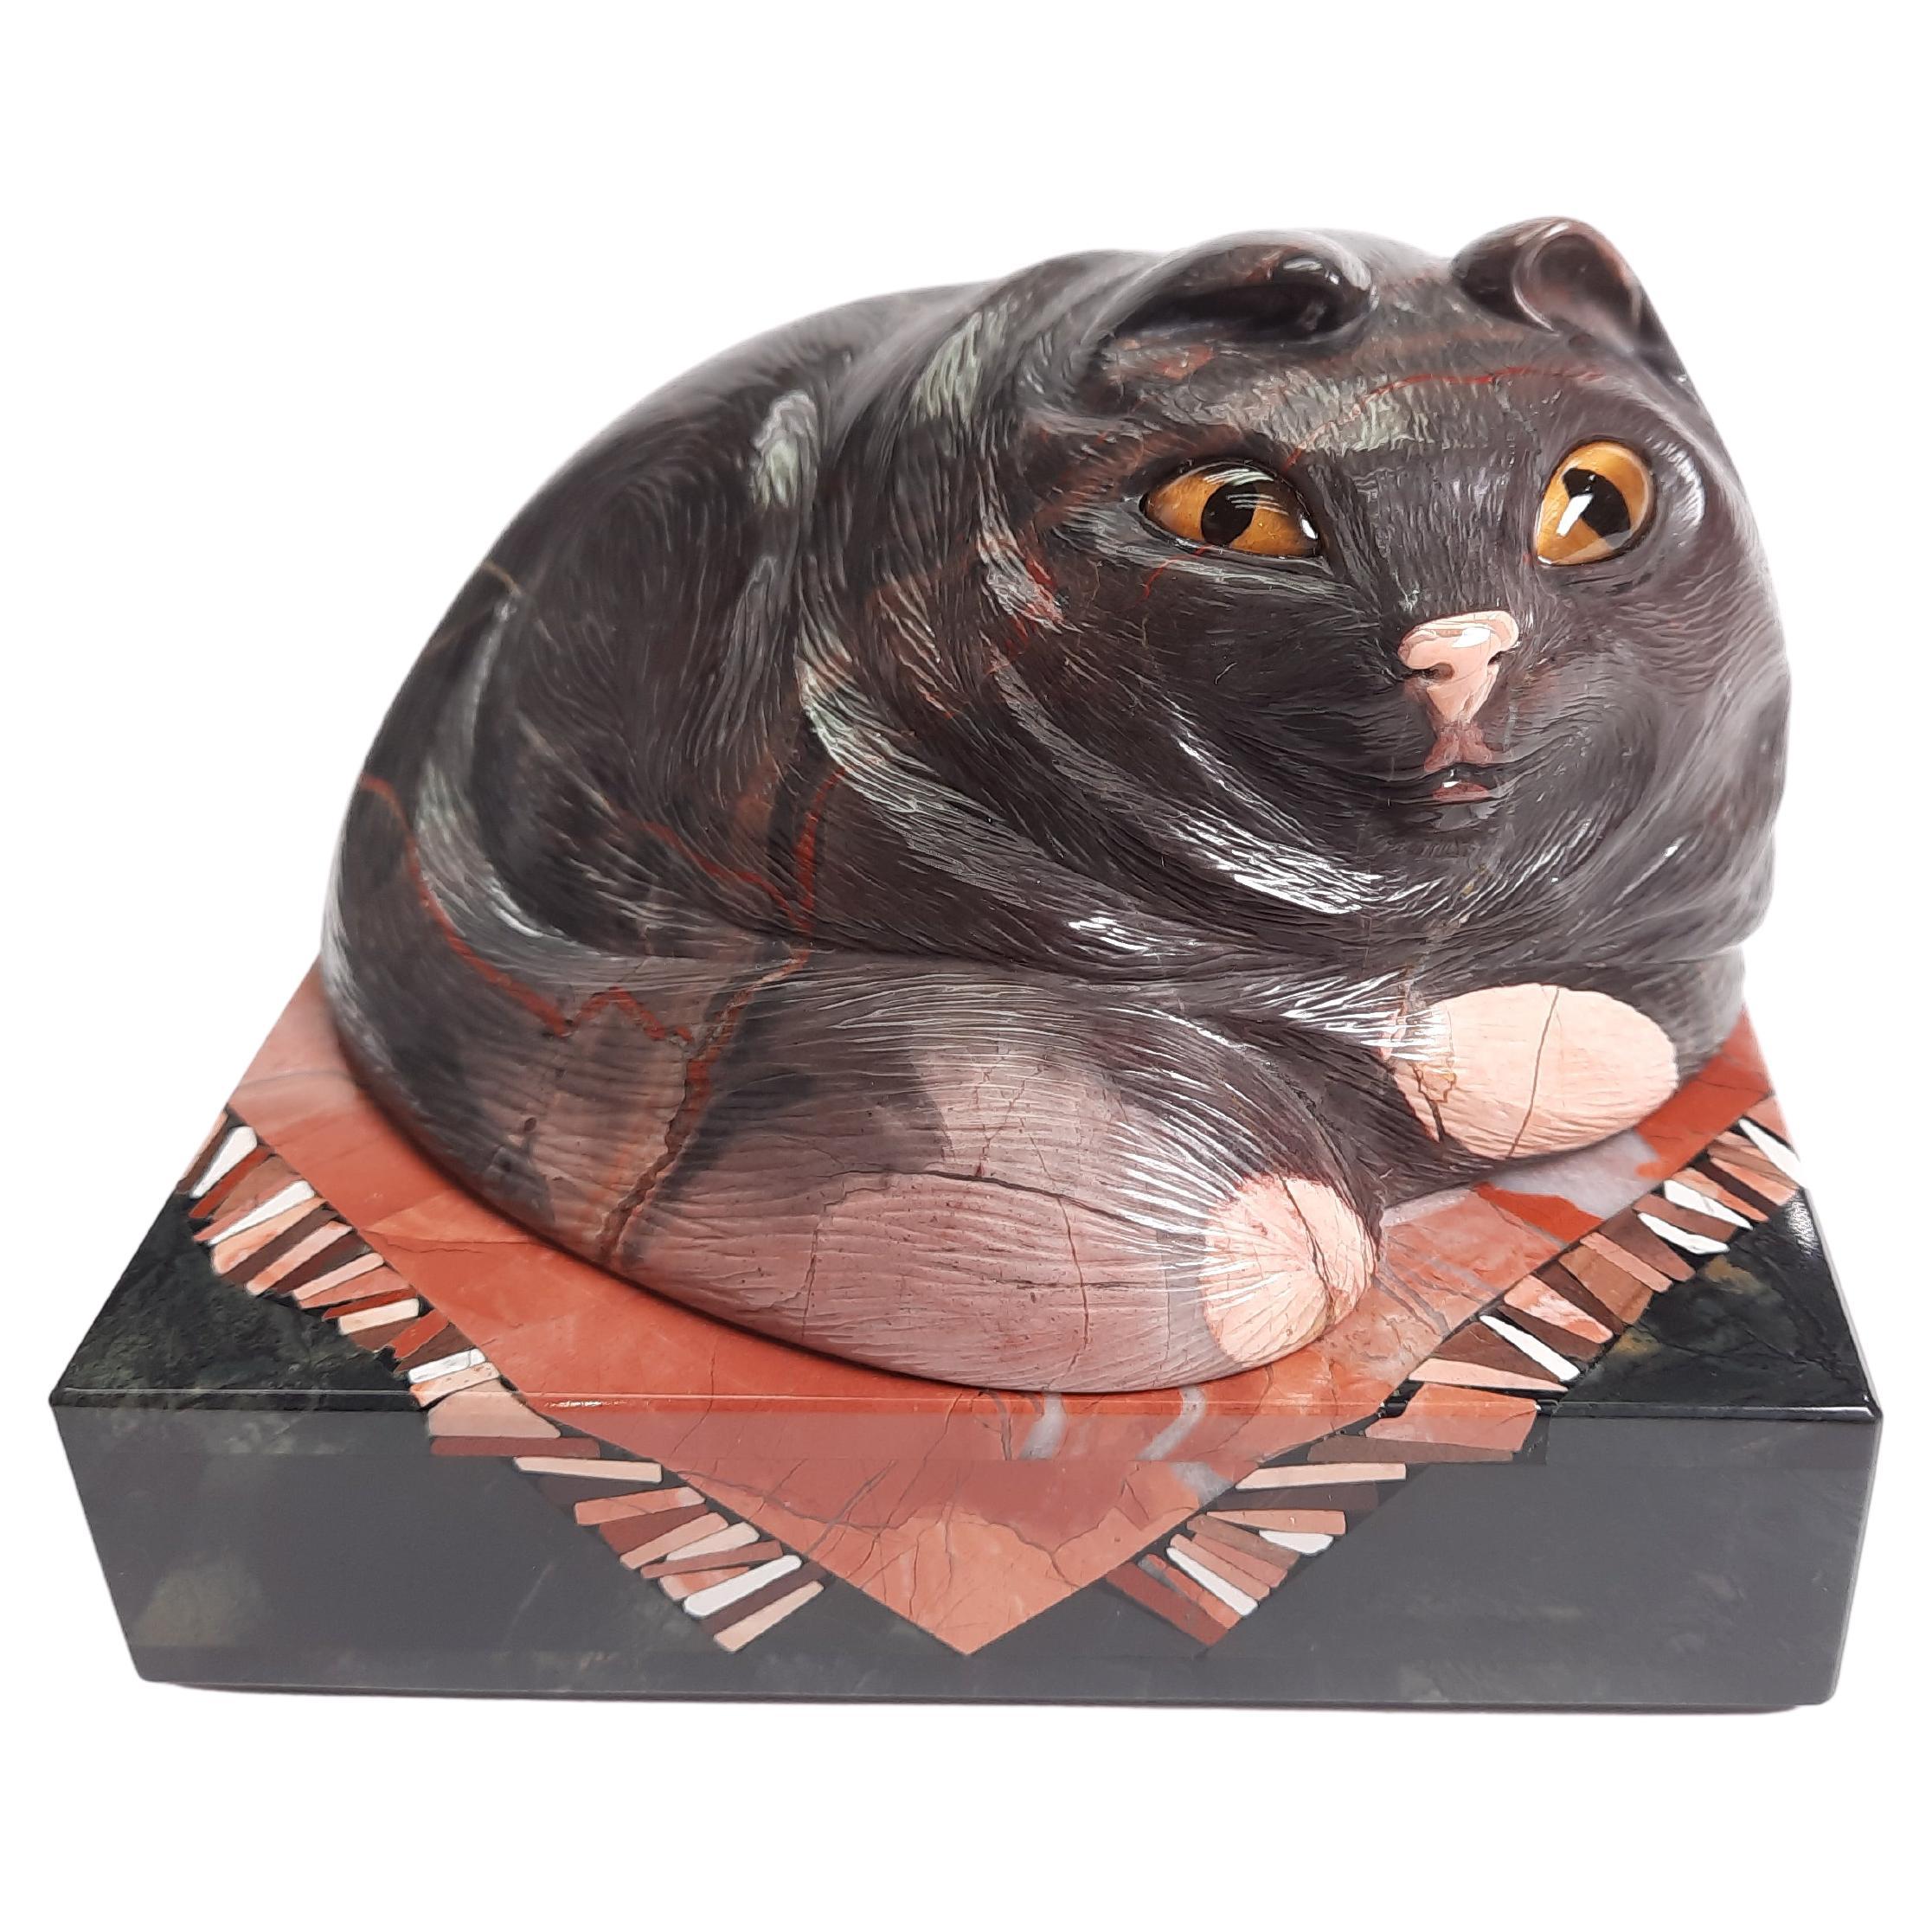 Stone Carving Art Cat Miniature For Sale